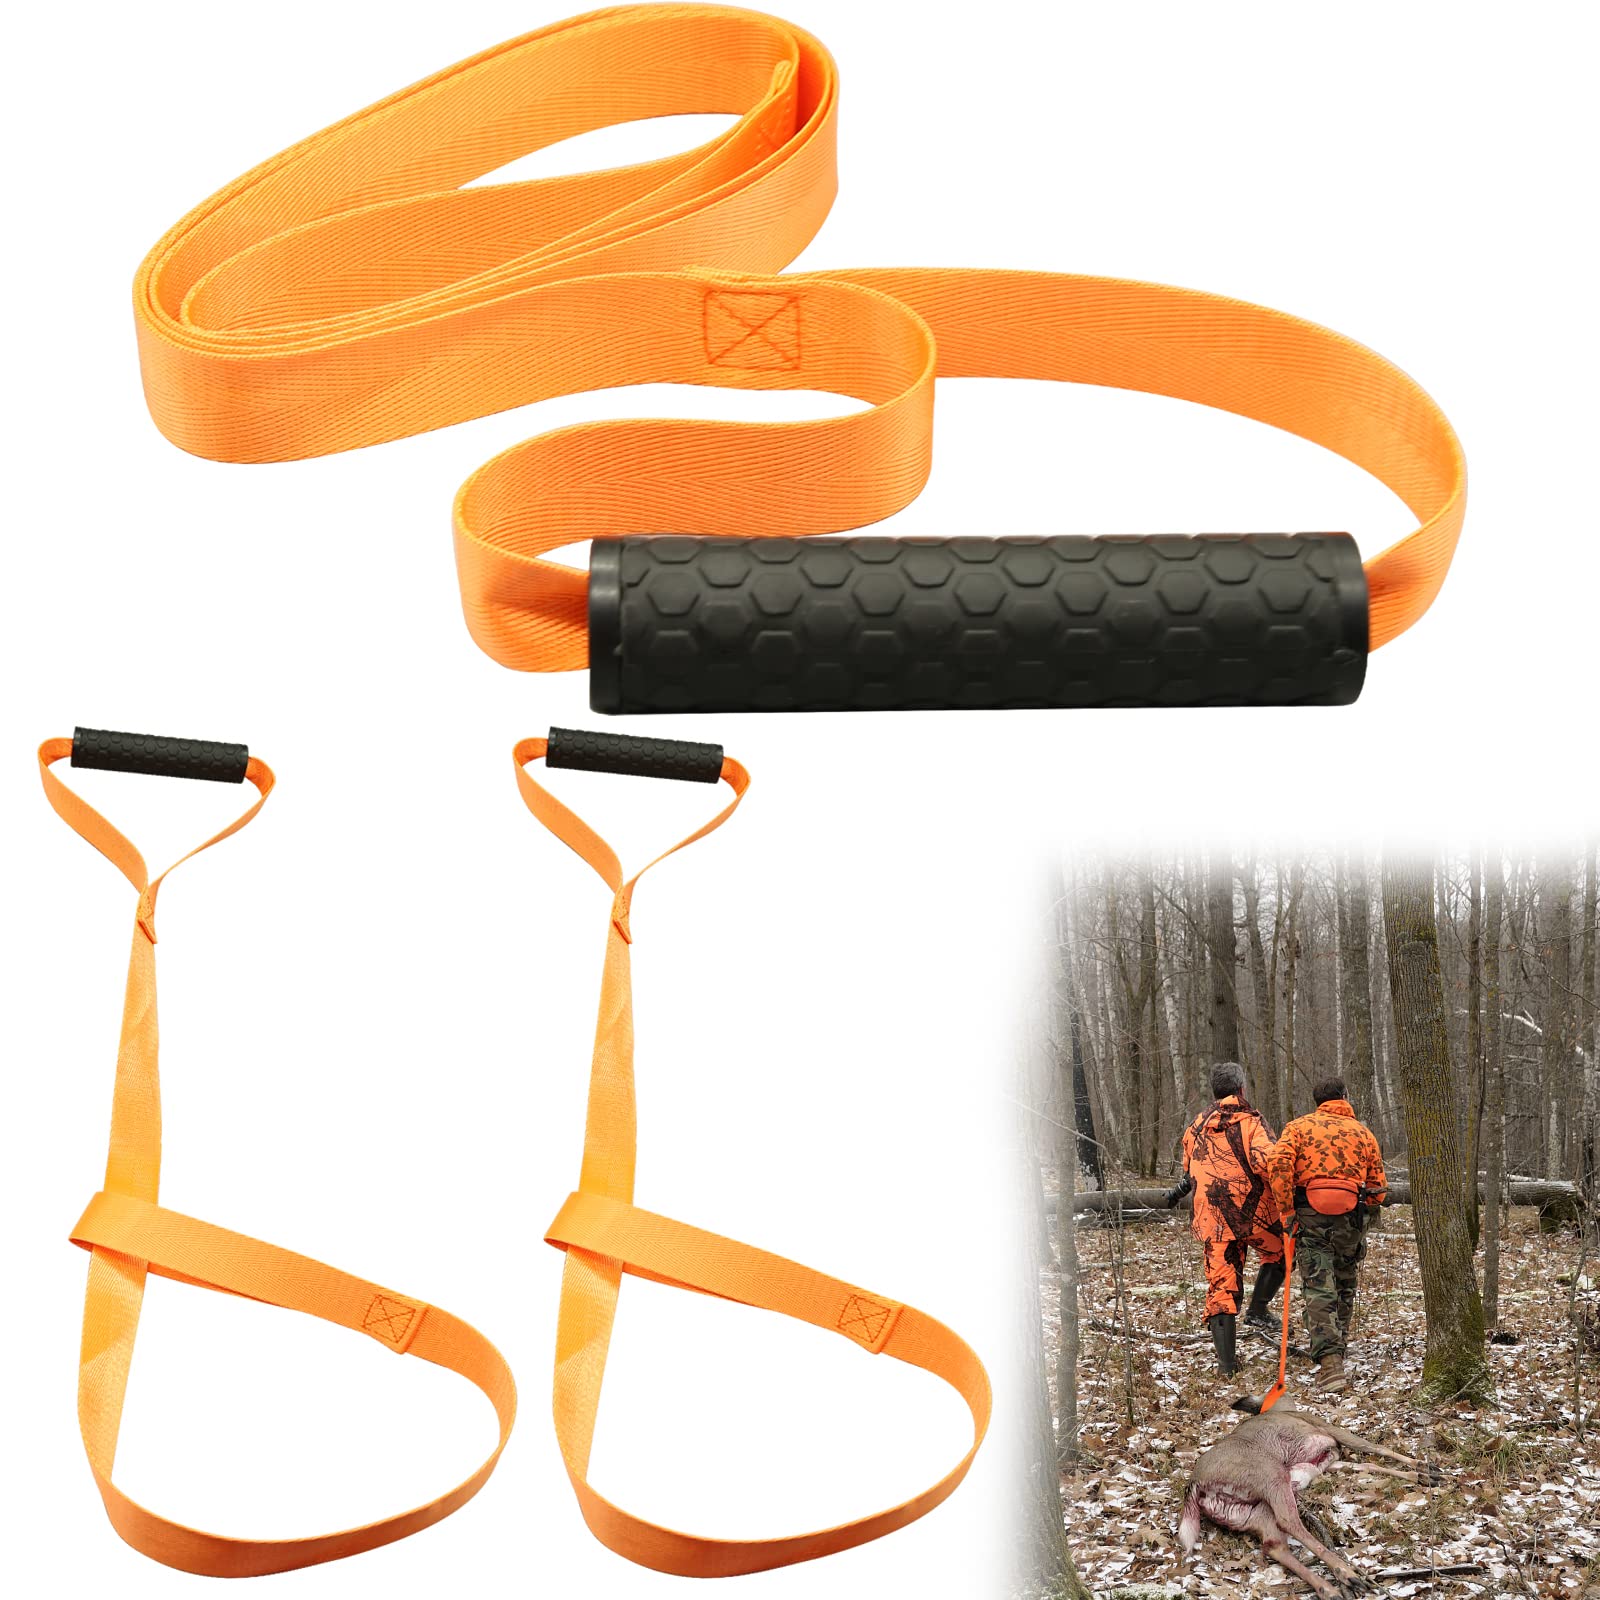 3Pcs Deer Drag Rope with Non-Slip Handle, Heavy Duty Deer Drag Strap  Hunting Dragging Pull Rope, Strong Bearing Capacity Deer Dragging Harness  Deer Hunting Accessories for Big and Small Game, Orange